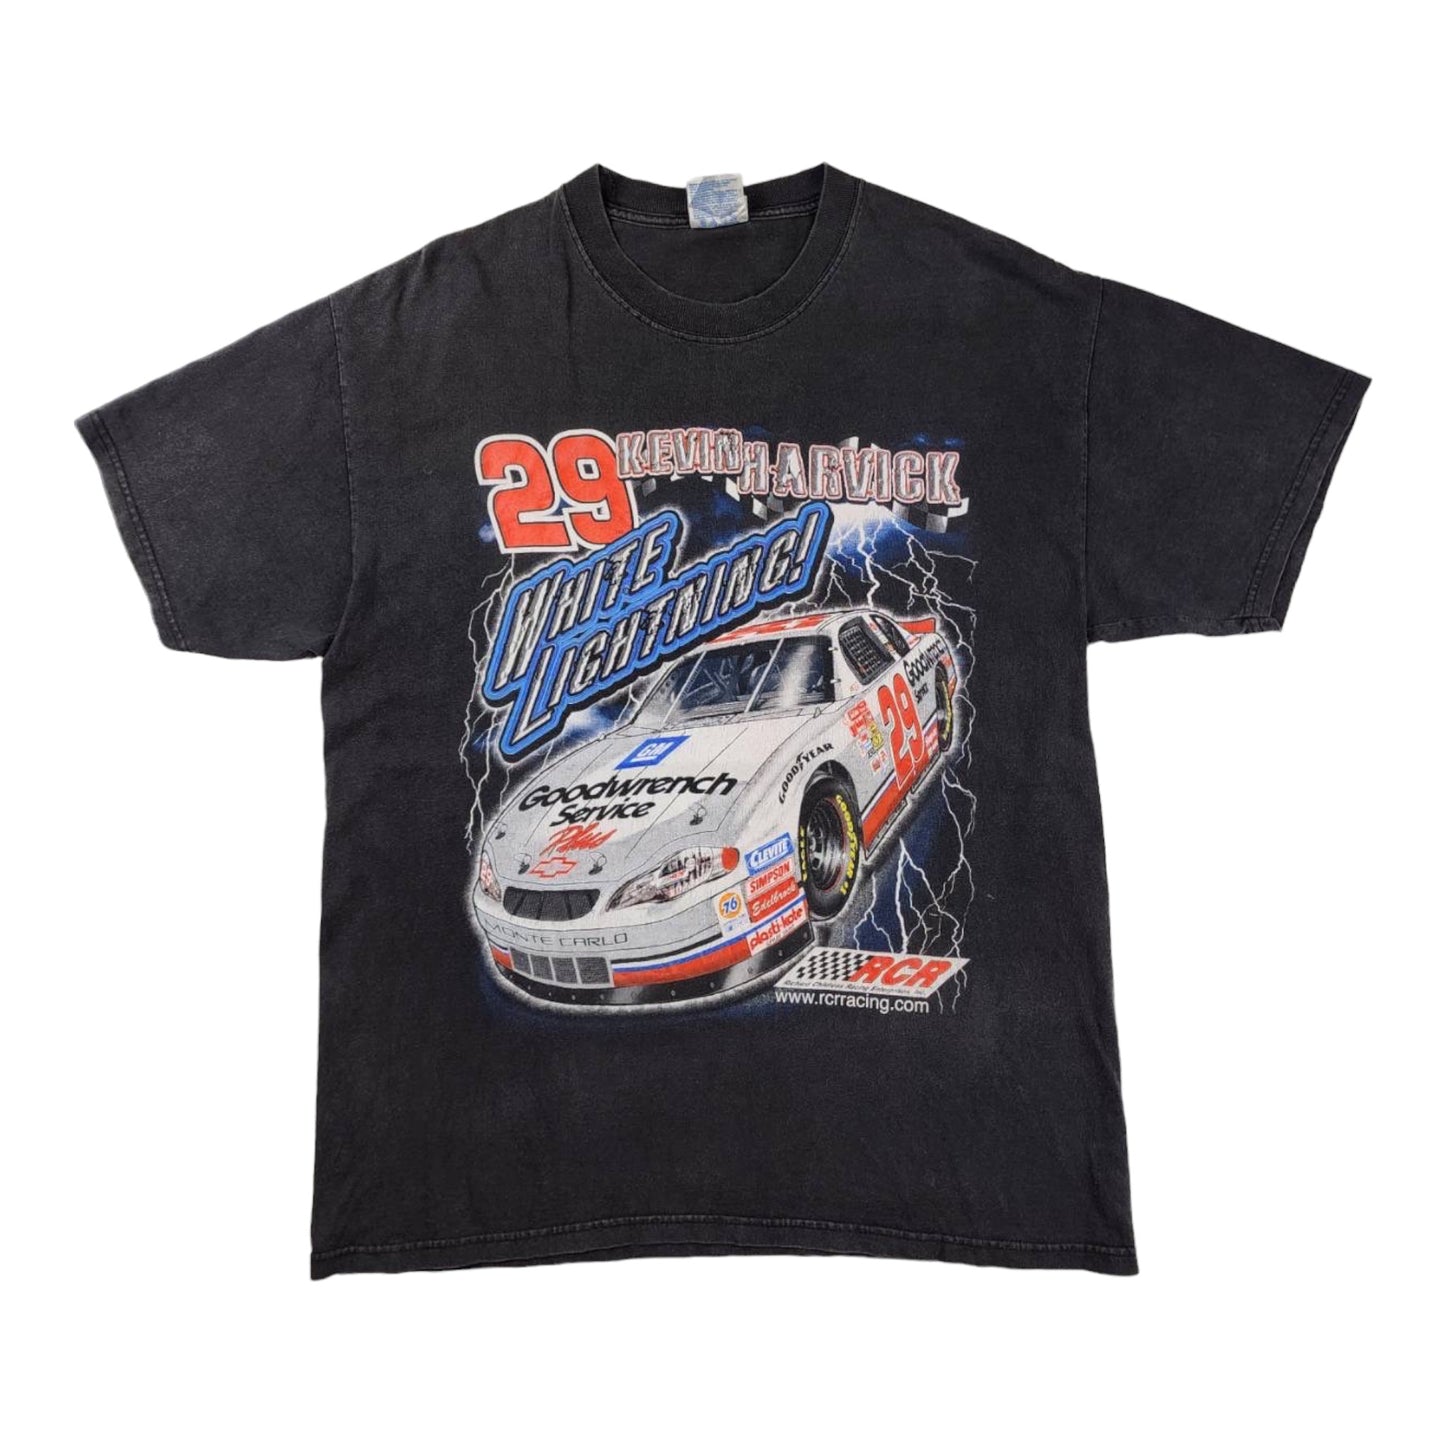 Nascar Racing "Goodwrench Plus" Team T-shirt